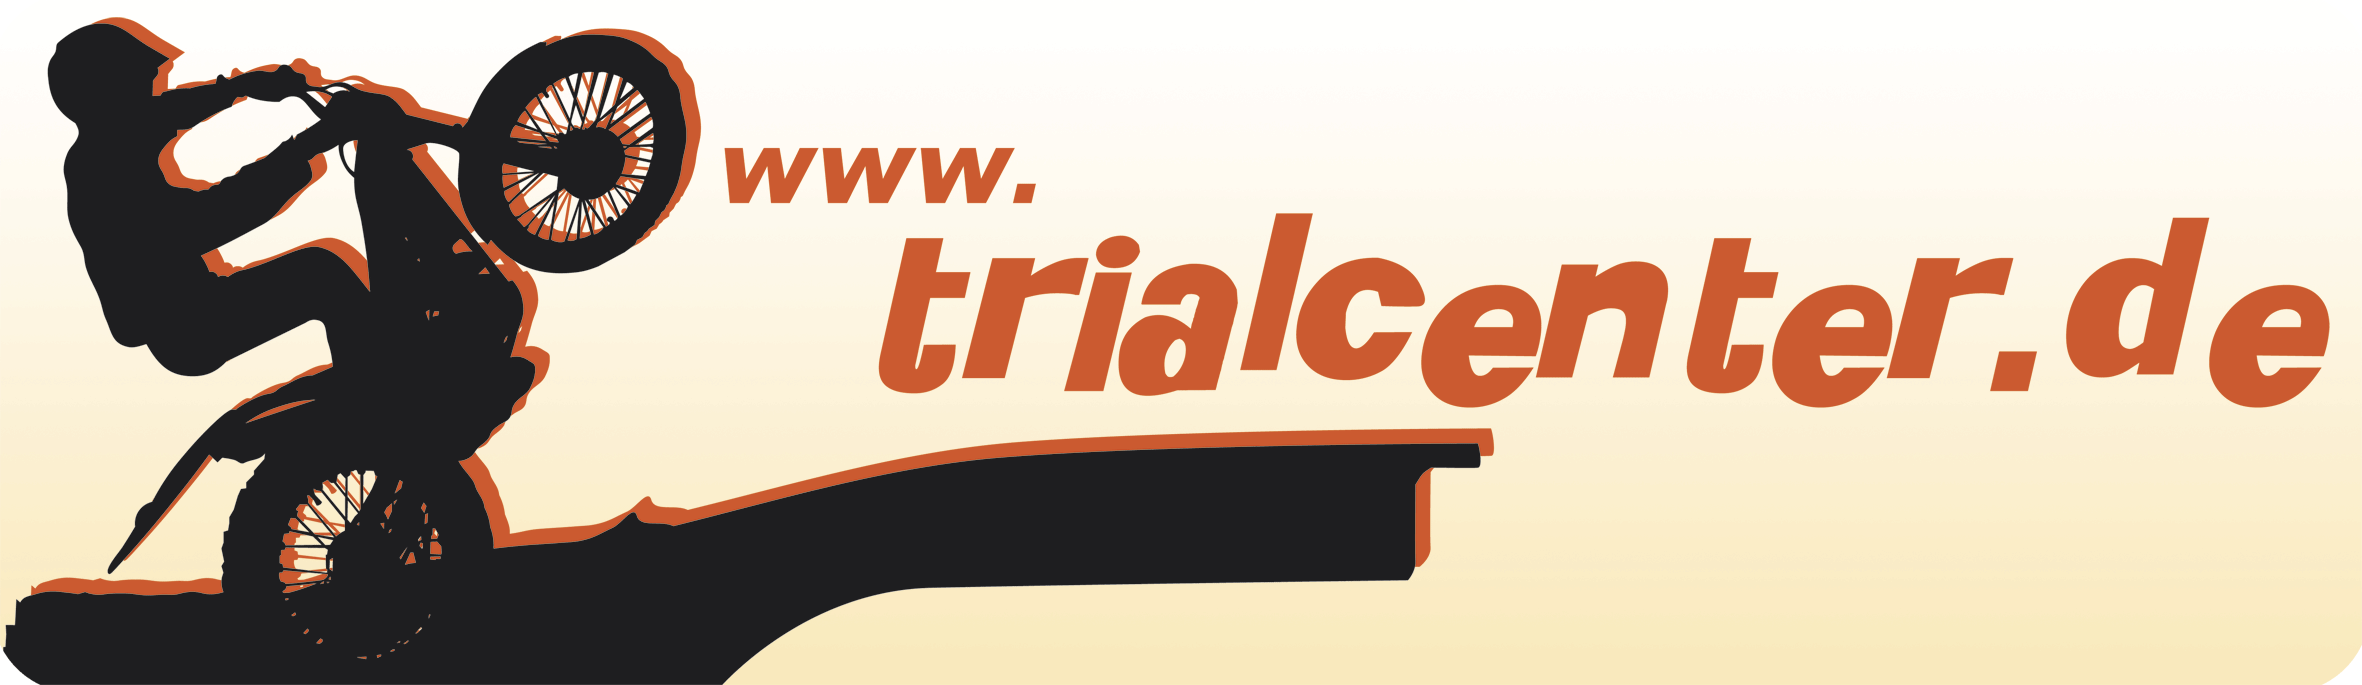 trialcenter_logo_power print.png